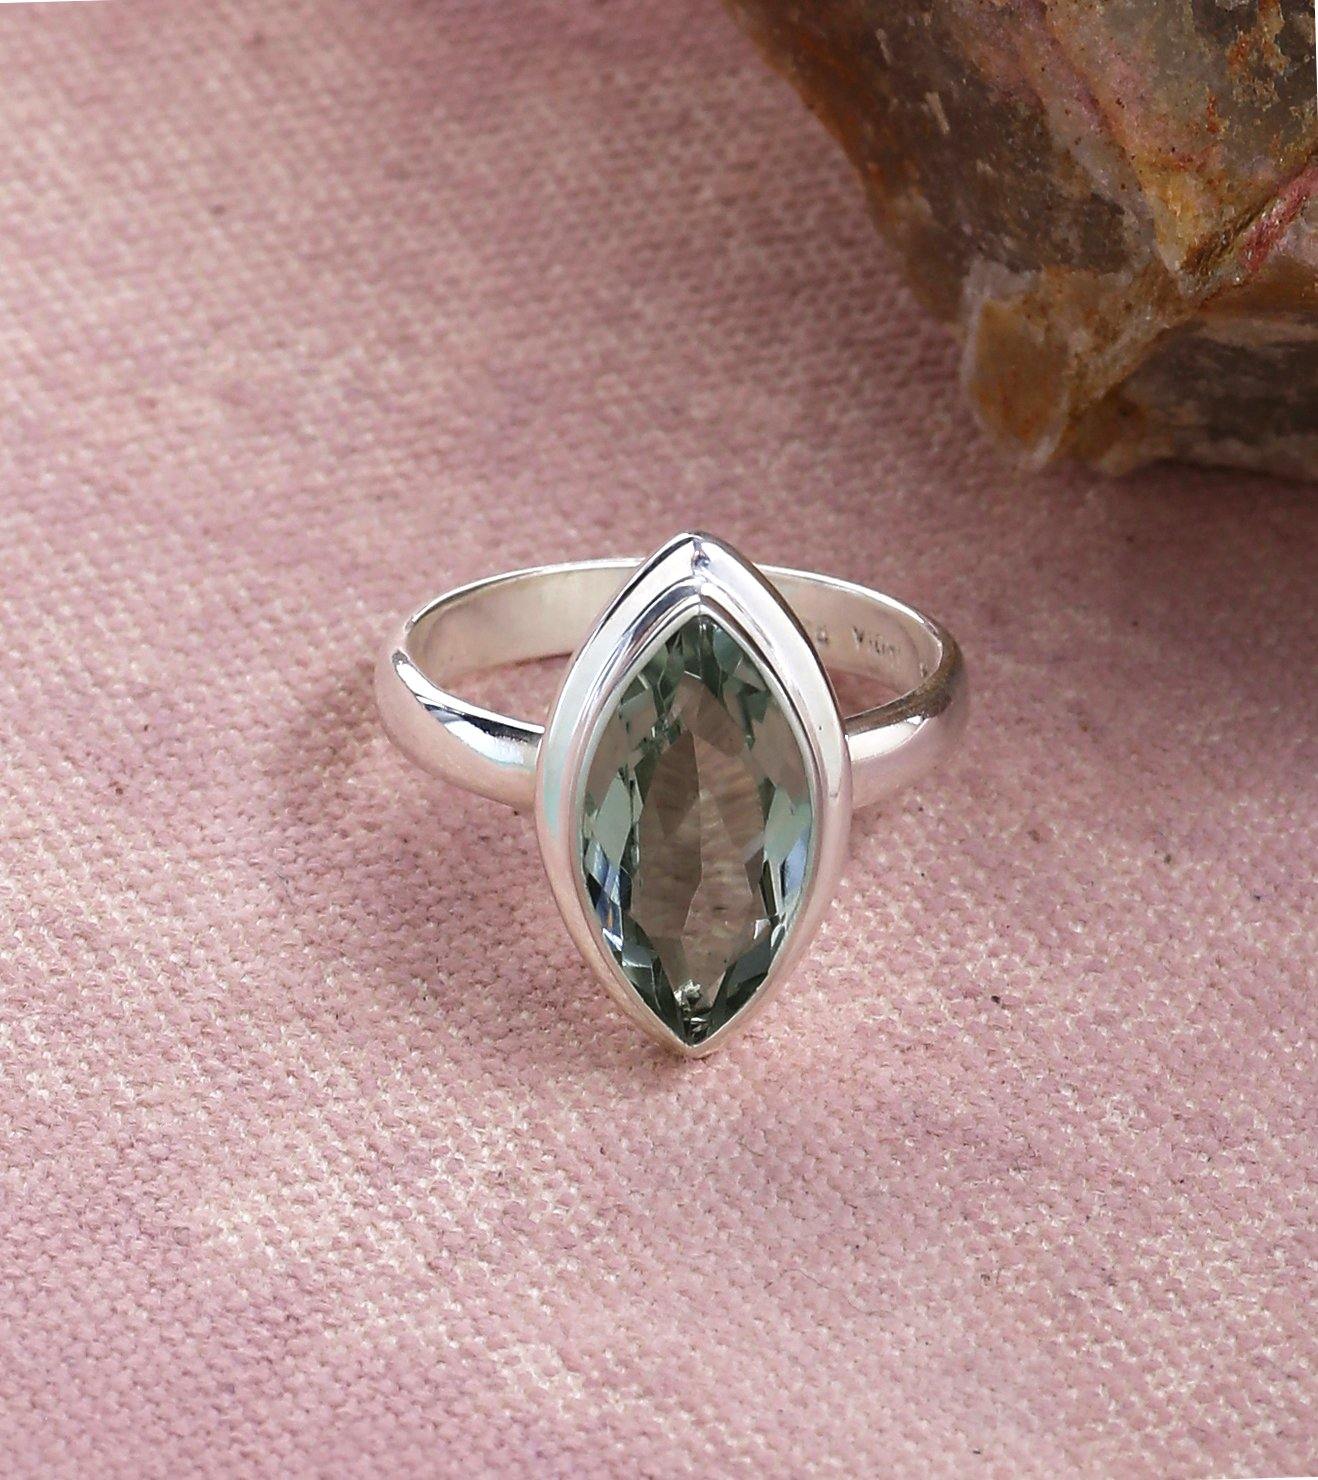 Green Amethyst Solid 925 Sterling Silver Ring Jewelry - YoTreasure